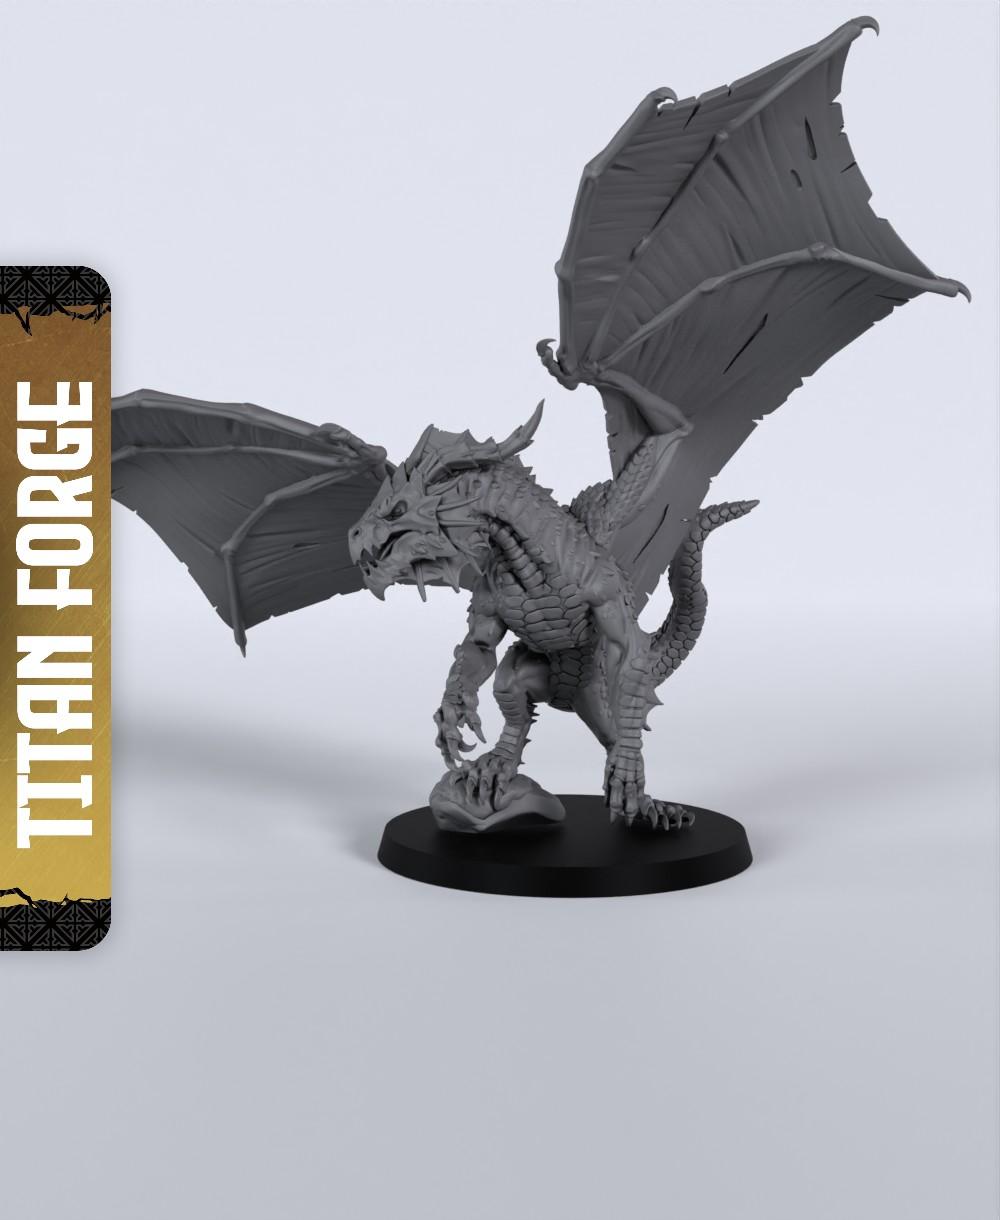 White Dragon - With Free Dragon Warhammer - 5e DnD Inspired for RPG and Wargamers 3d model